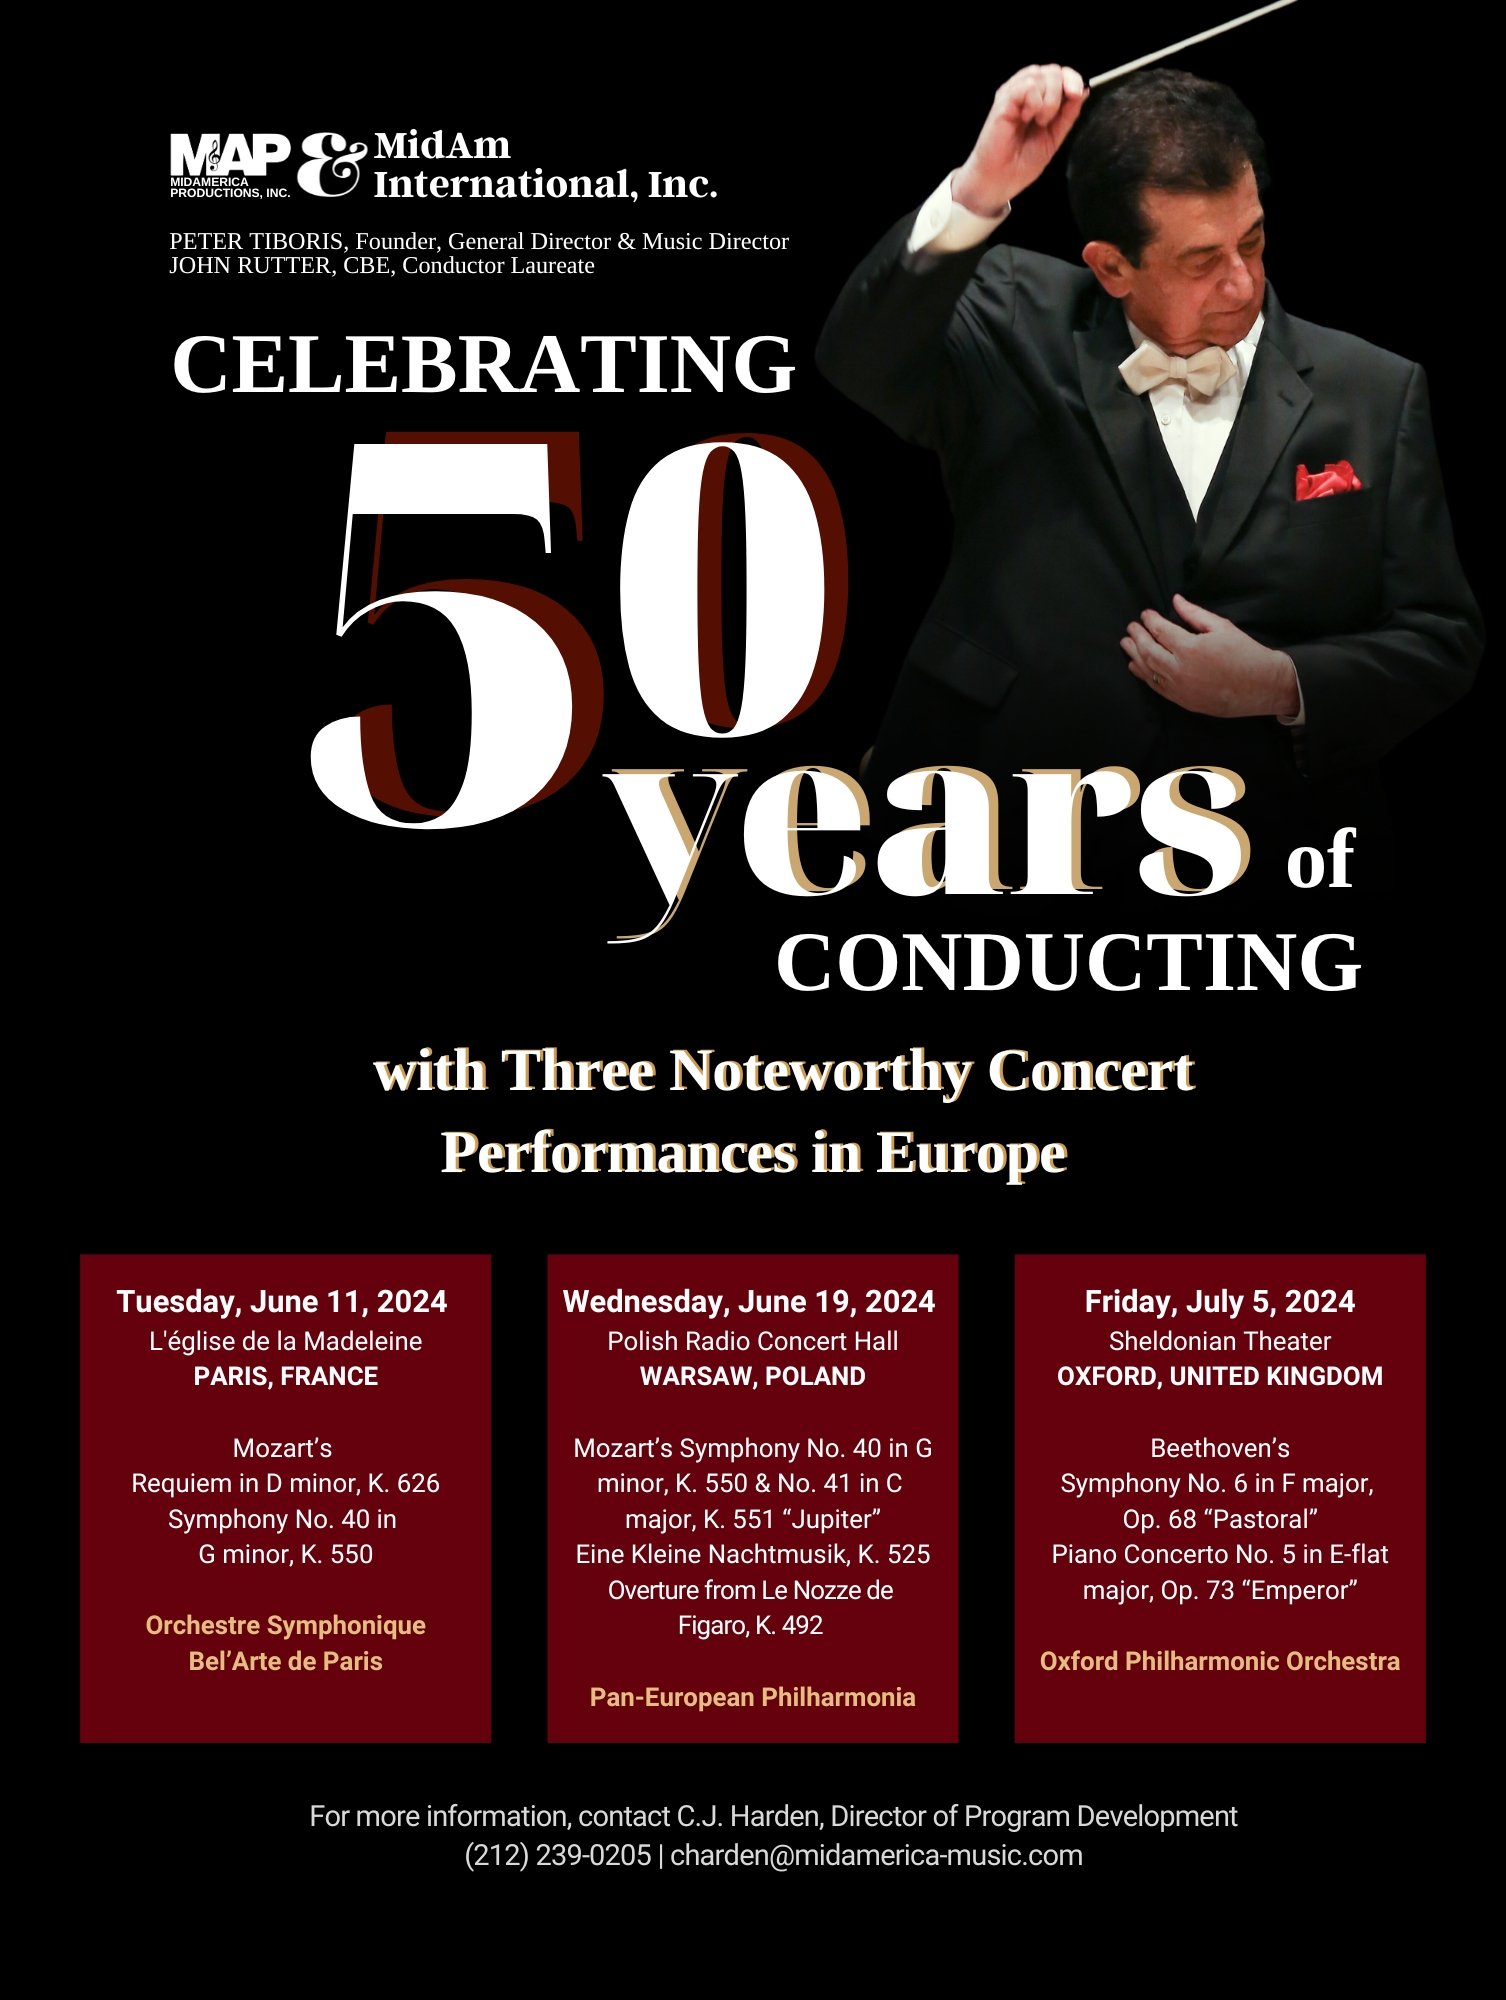 Are you traveling to Europe this summer? Join the celebration of maestro Peter Tiboris' 50th year of conducting with three major concert appearances in France, Poland, and Oxford! #celebrate50 #europetravel #mozart #beethoven #europetour